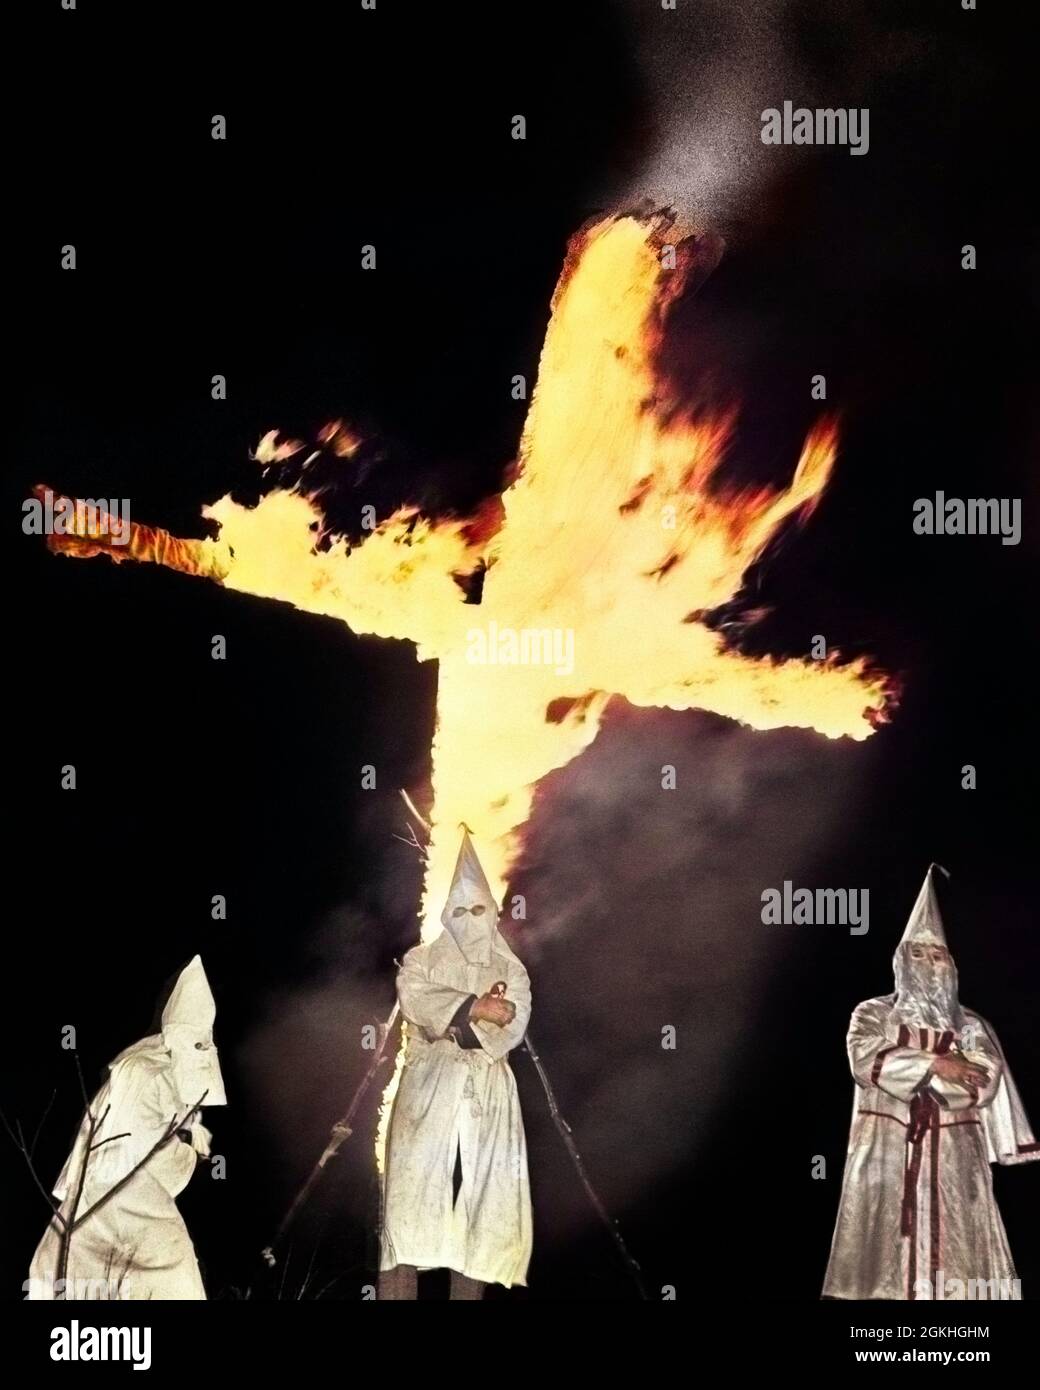 1930s HOODED MEMBERS OF KKK KU KLUX KLAN STANDING IN FRONT OF BURNING CROSS - q73548c CPC001 HARS GATHERING SADNESS NORTH AMERICA PHYSICAL ROBES NATIONALISM SOCIETY AUTHORITY HOODED POLITICS SOUTHERN TERROR 1860s TERRORISM VIOLENT INTIMIDATION ORGANIZATION SUPREMACY BASED MURDER RIGHT-WING TERRORIST ANTI-BLACK ANTI-IMMIGRANT ANTI-IMMIGRATION ANTI-JUDAISM ANTI-NEGRO ANTI-SEMITIC ANTI-SEMITISM ASSAULT CAUCASIAN ETHNICITY EXTREMIST FAR RIGHT FIERY HATE HATEFUL HOODS INTOLERANCE INTOLERANT KKK KLAN KU KLUX KLAN OLD FASHIONED RACISM RACIST REACTIONARY RECONSTRUCTION Stock Photo